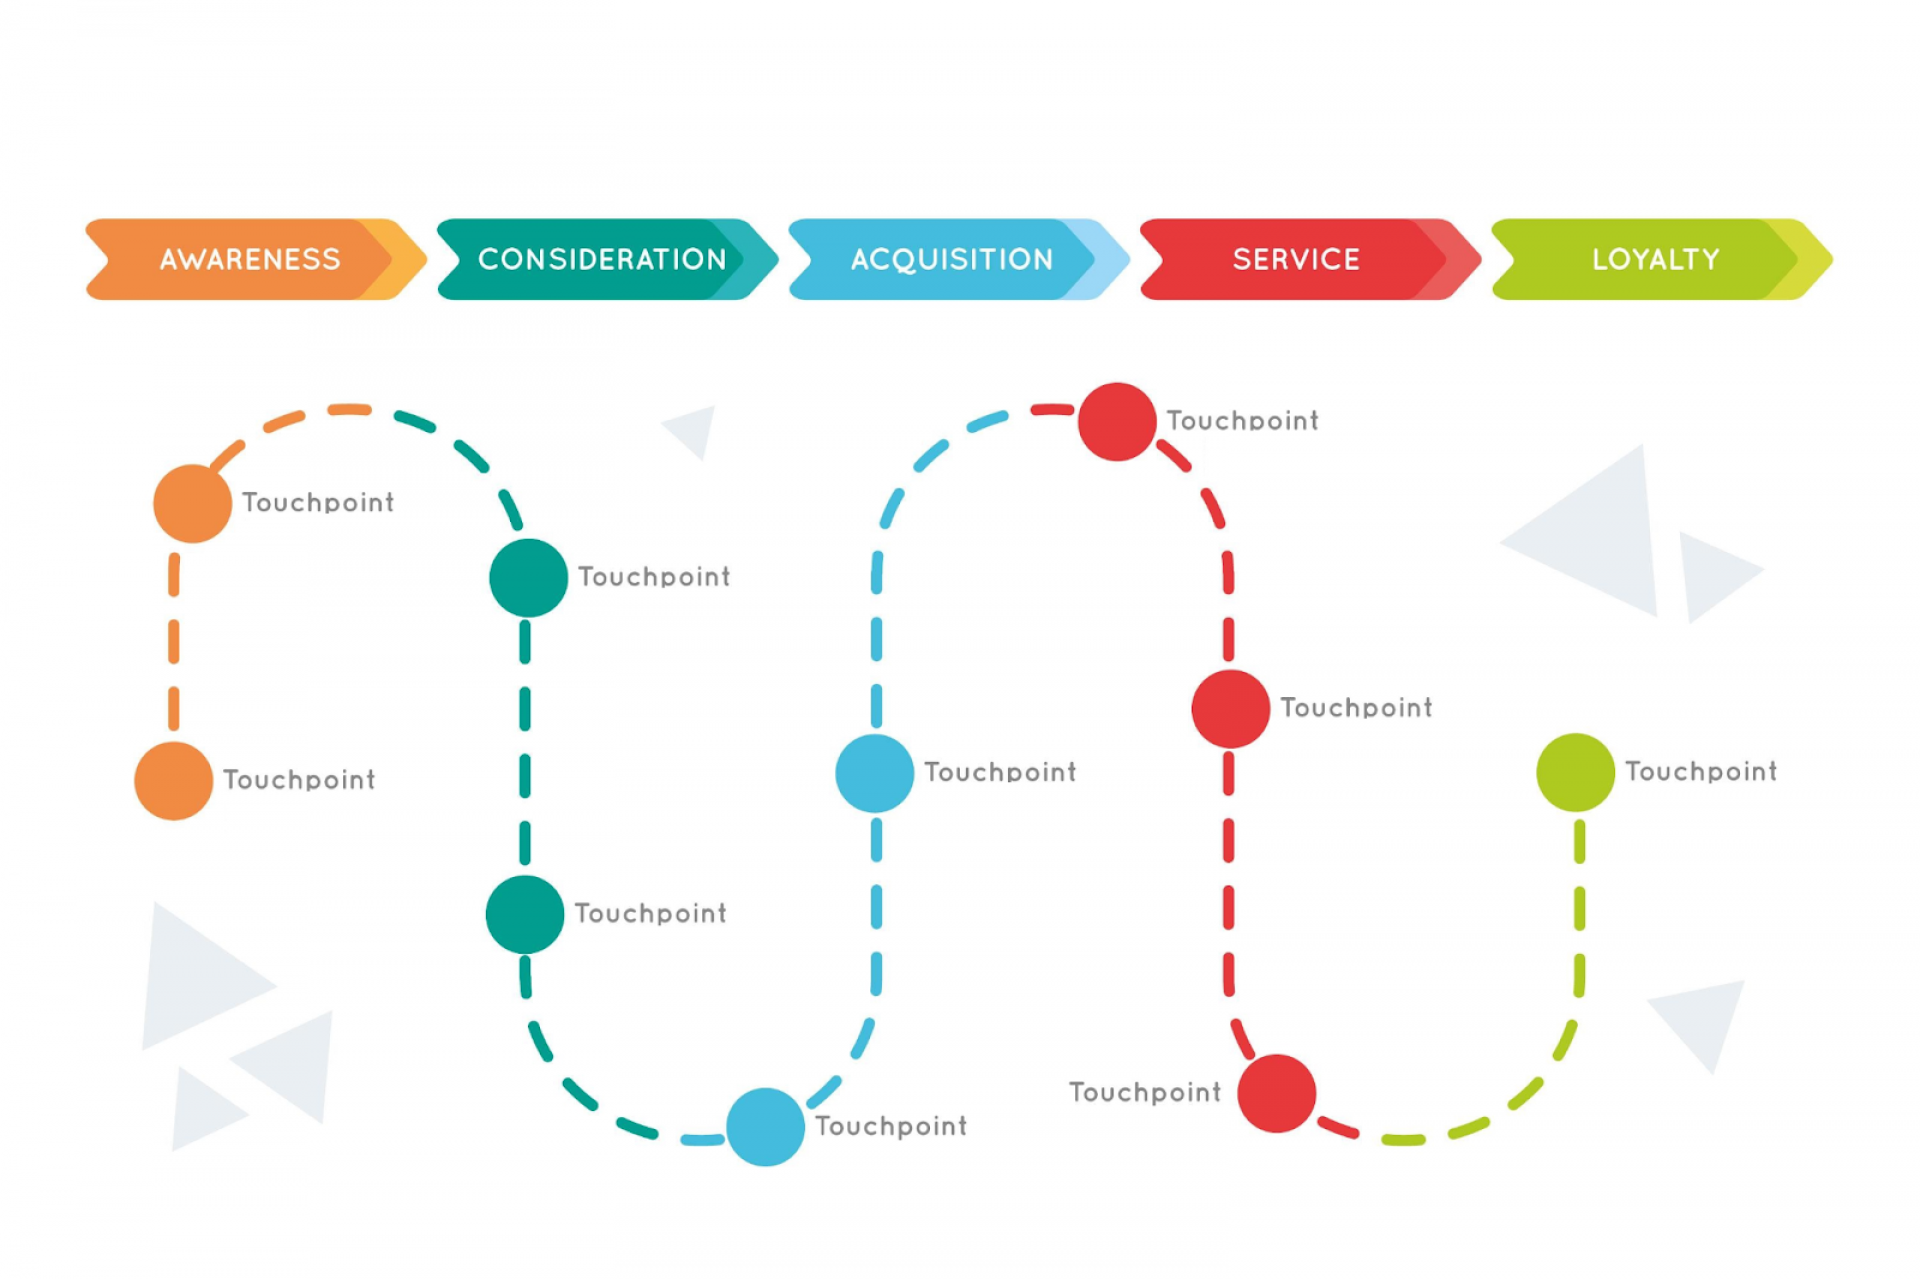 20 Touchpoints That Will Optimize Your Members’ ‘Customer Journey’ Online